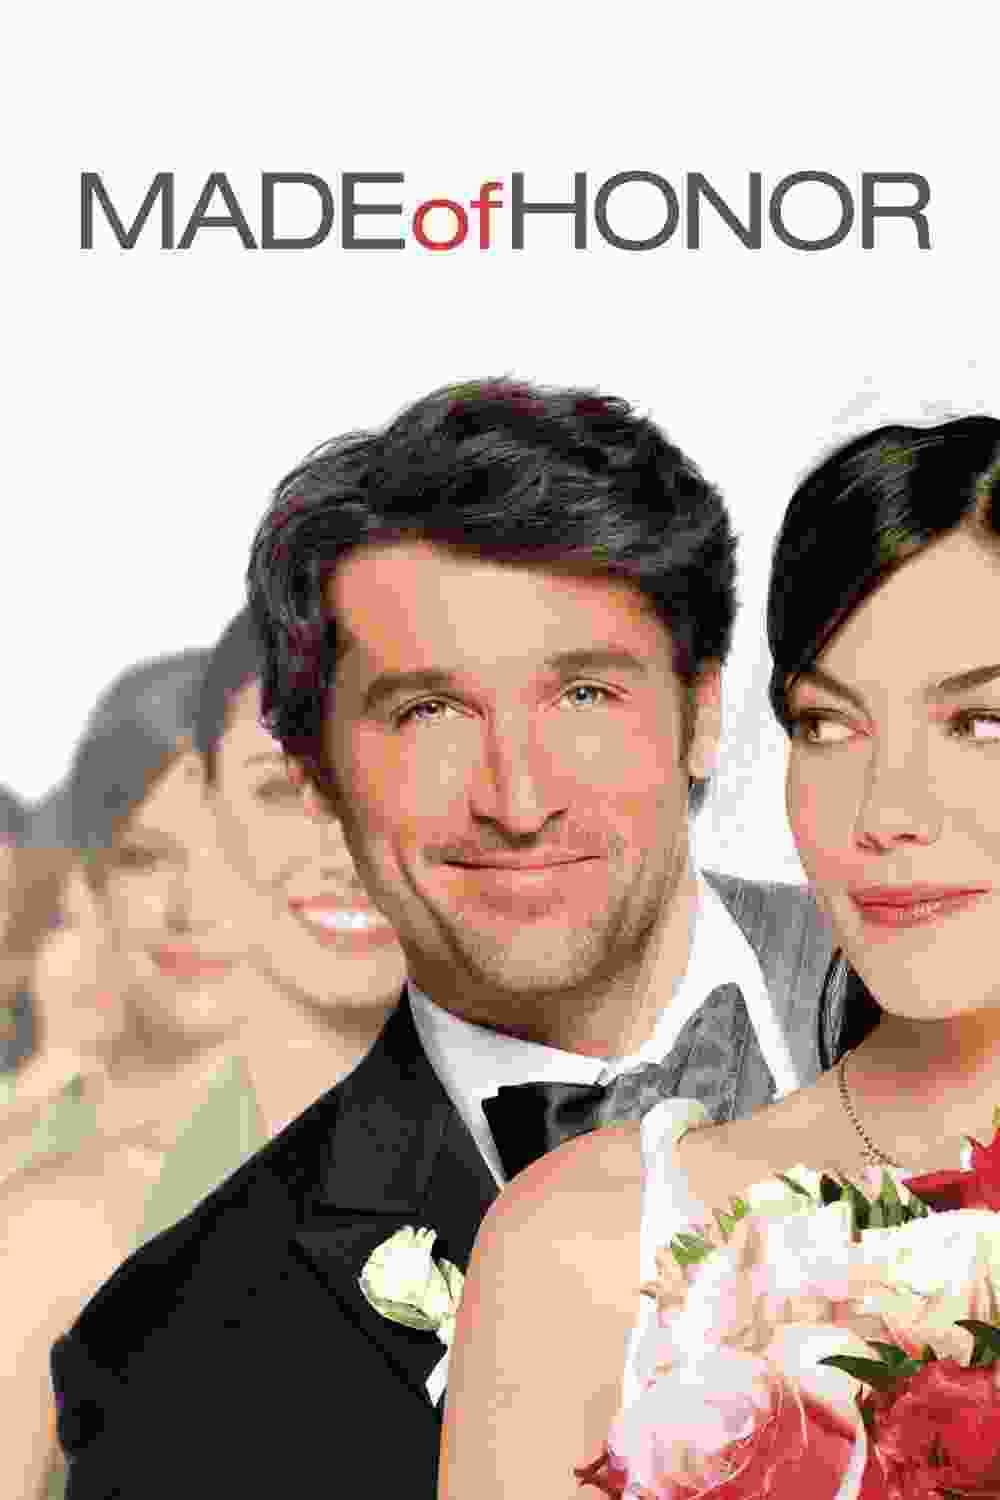 Made of Honor (2008) Patrick Dempsey